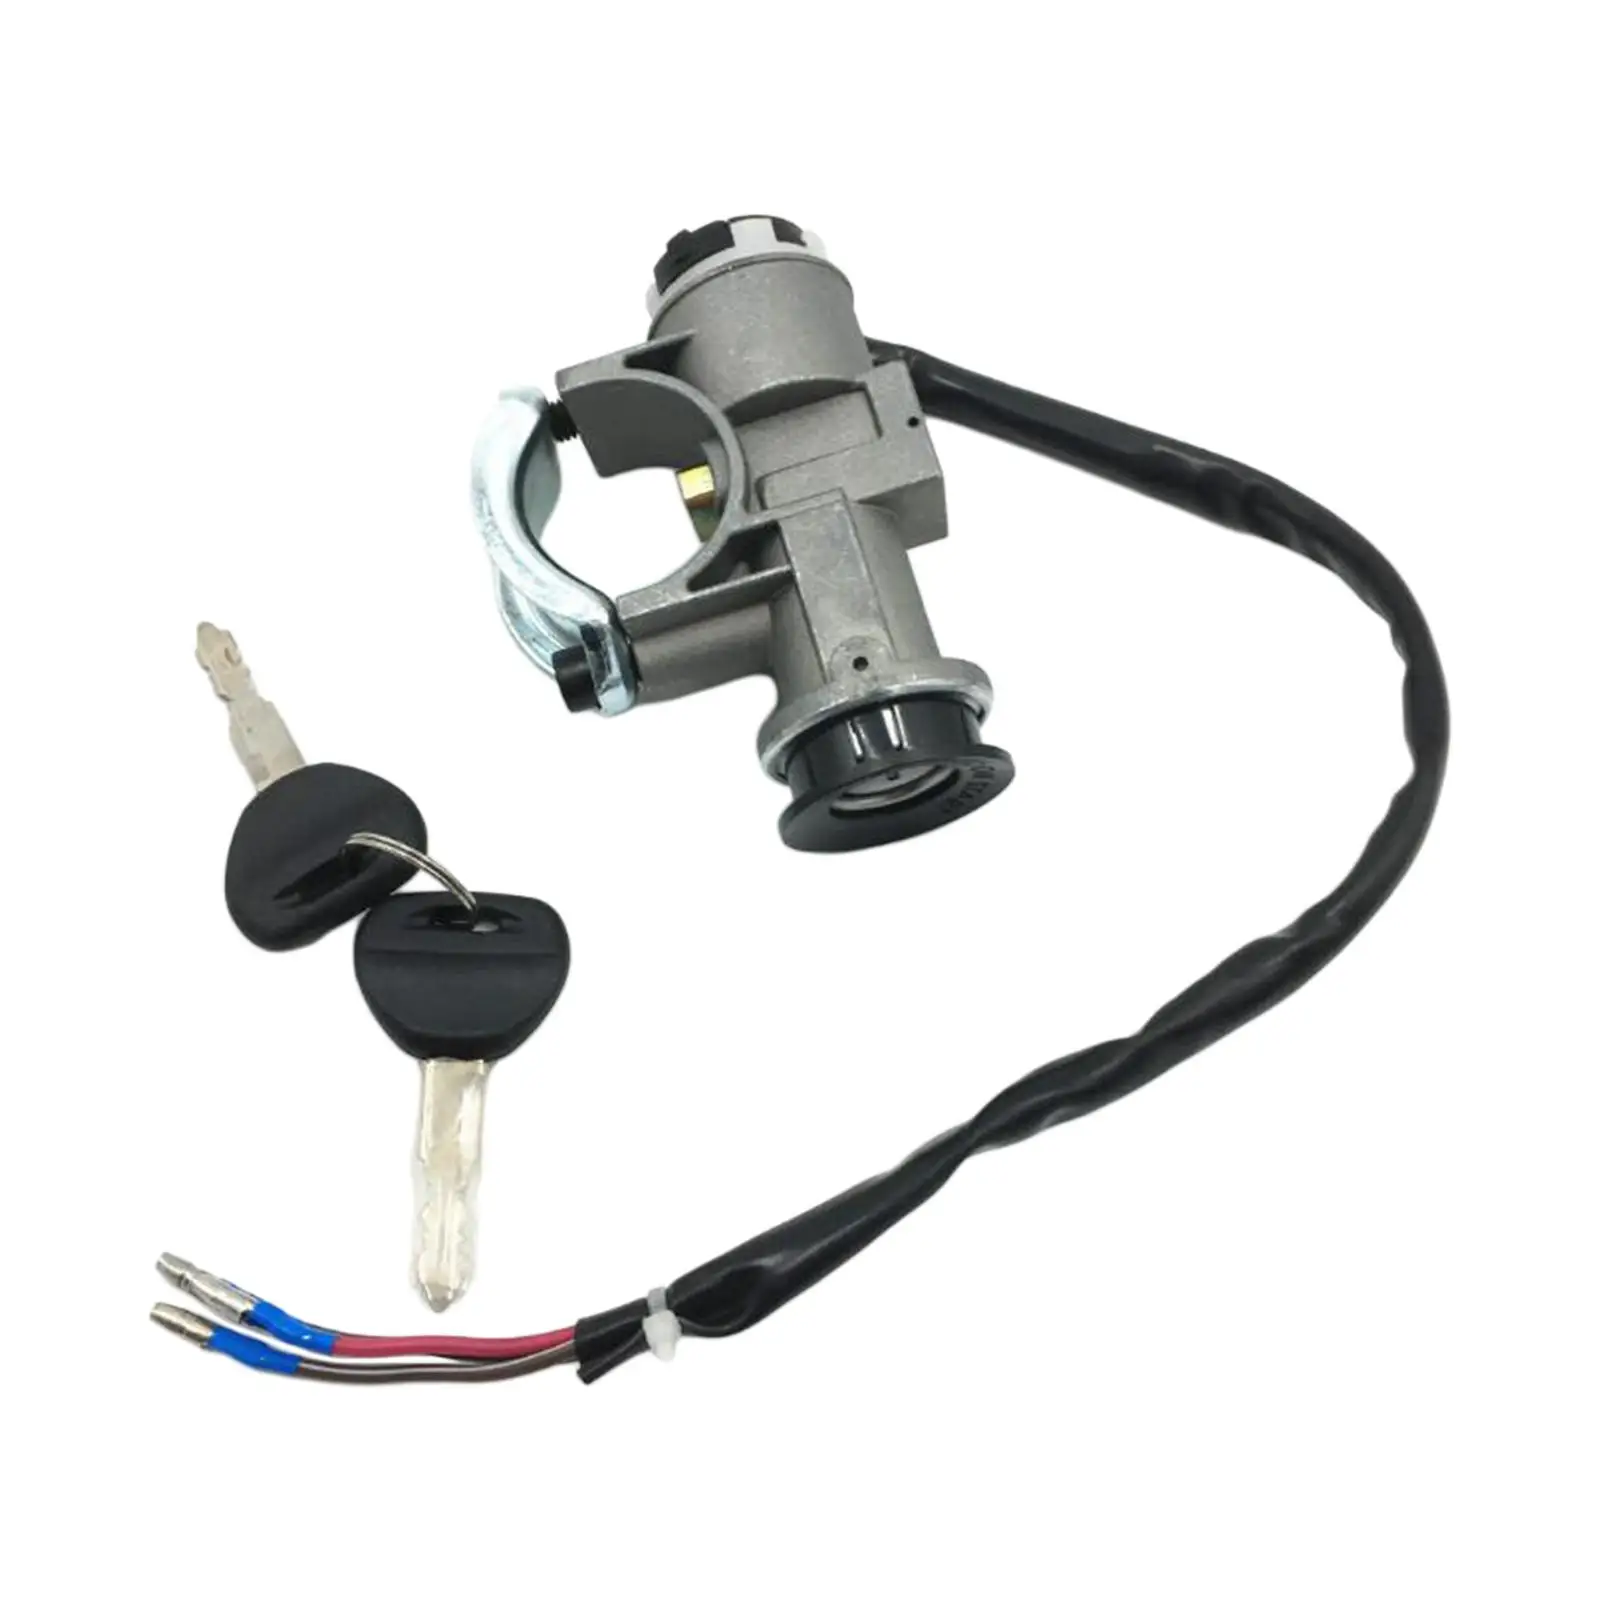 Motorcycle Ignition Switch with Keys Replacement Parts Key Locking Starter Switch 3 Wires Ignition Switch for HS800 800cc